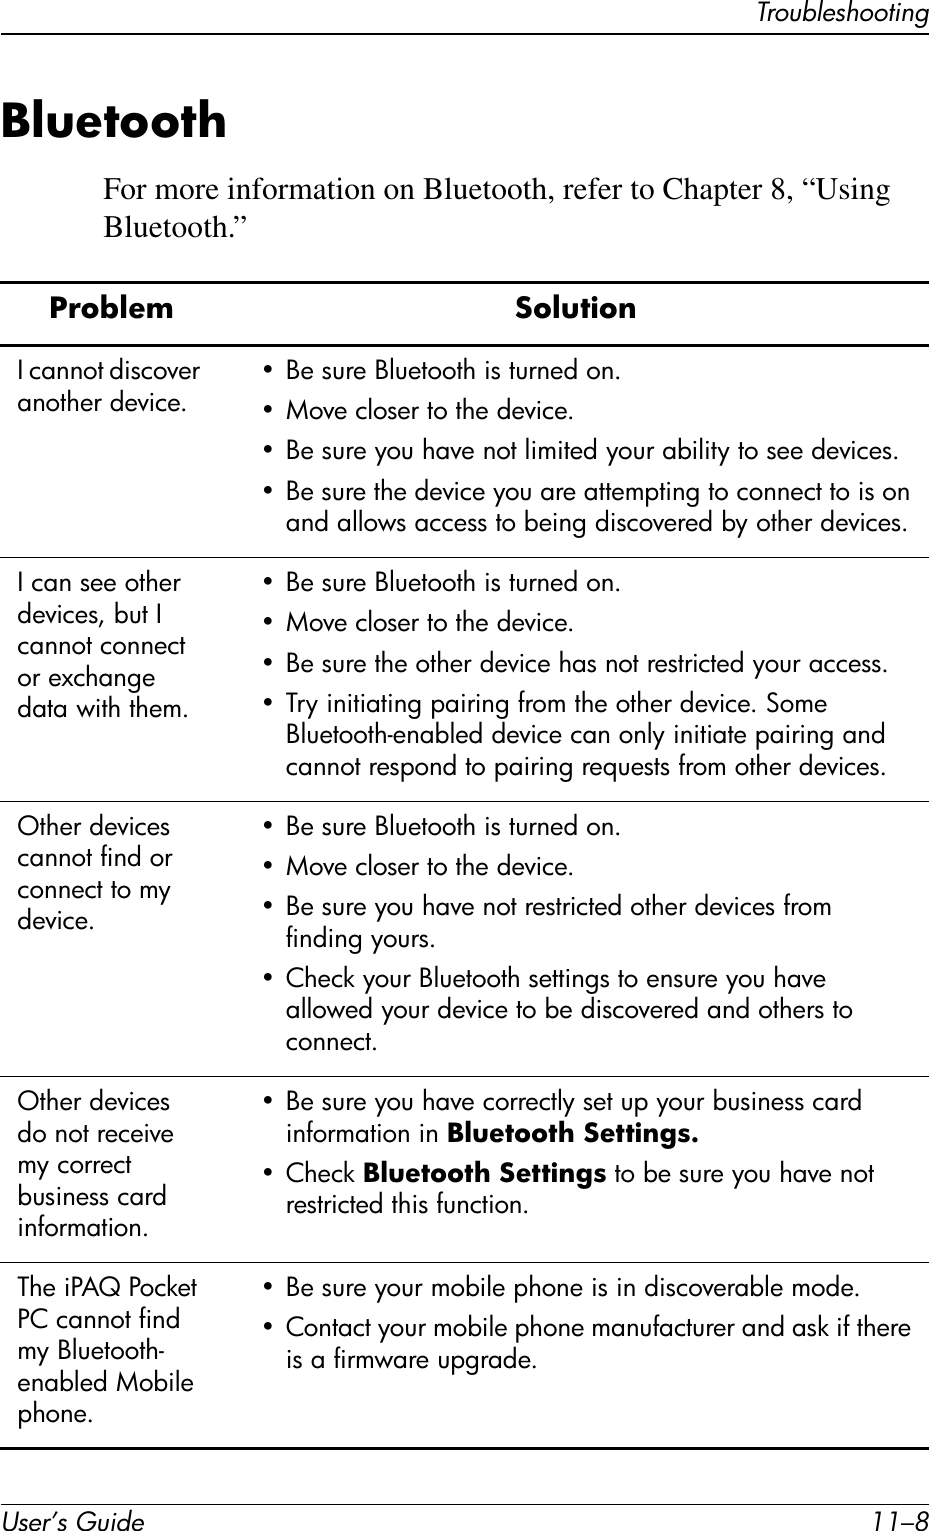 User’s Guide 11–8TroubleshootingBluetoothFor more information on Bluetooth, refer to Chapter 8, “Using Bluetooth.”Problem SolutionI cannot discover another device.• Be sure Bluetooth is turned on.• Move closer to the device.• Be sure you have not limited your ability to see devices.• Be sure the device you are attempting to connect to is on and allows access to being discovered by other devices.I can see other devices, but I cannot connect or exchange data with them.• Be sure Bluetooth is turned on.• Move closer to the device.• Be sure the other device has not restricted your access.• Try initiating pairing from the other device. Some Bluetooth-enabled device can only initiate pairing and cannot respond to pairing requests from other devices.Other devices cannot find or connect to my device.• Be sure Bluetooth is turned on.• Move closer to the device.• Be sure you have not restricted other devices from finding yours.• Check your Bluetooth settings to ensure you have allowed your device to be discovered and others to connect.Other devices do not receive my correct business card information.• Be sure you have correctly set up your business card information in Bluetooth Settings.•Check Bluetooth Settings to be sure you have not restricted this function.The iPAQ Pocket PC cannot find my Bluetooth- enabled Mobile phone.• Be sure your mobile phone is in discoverable mode.• Contact your mobile phone manufacturer and ask if there is a firmware upgrade.